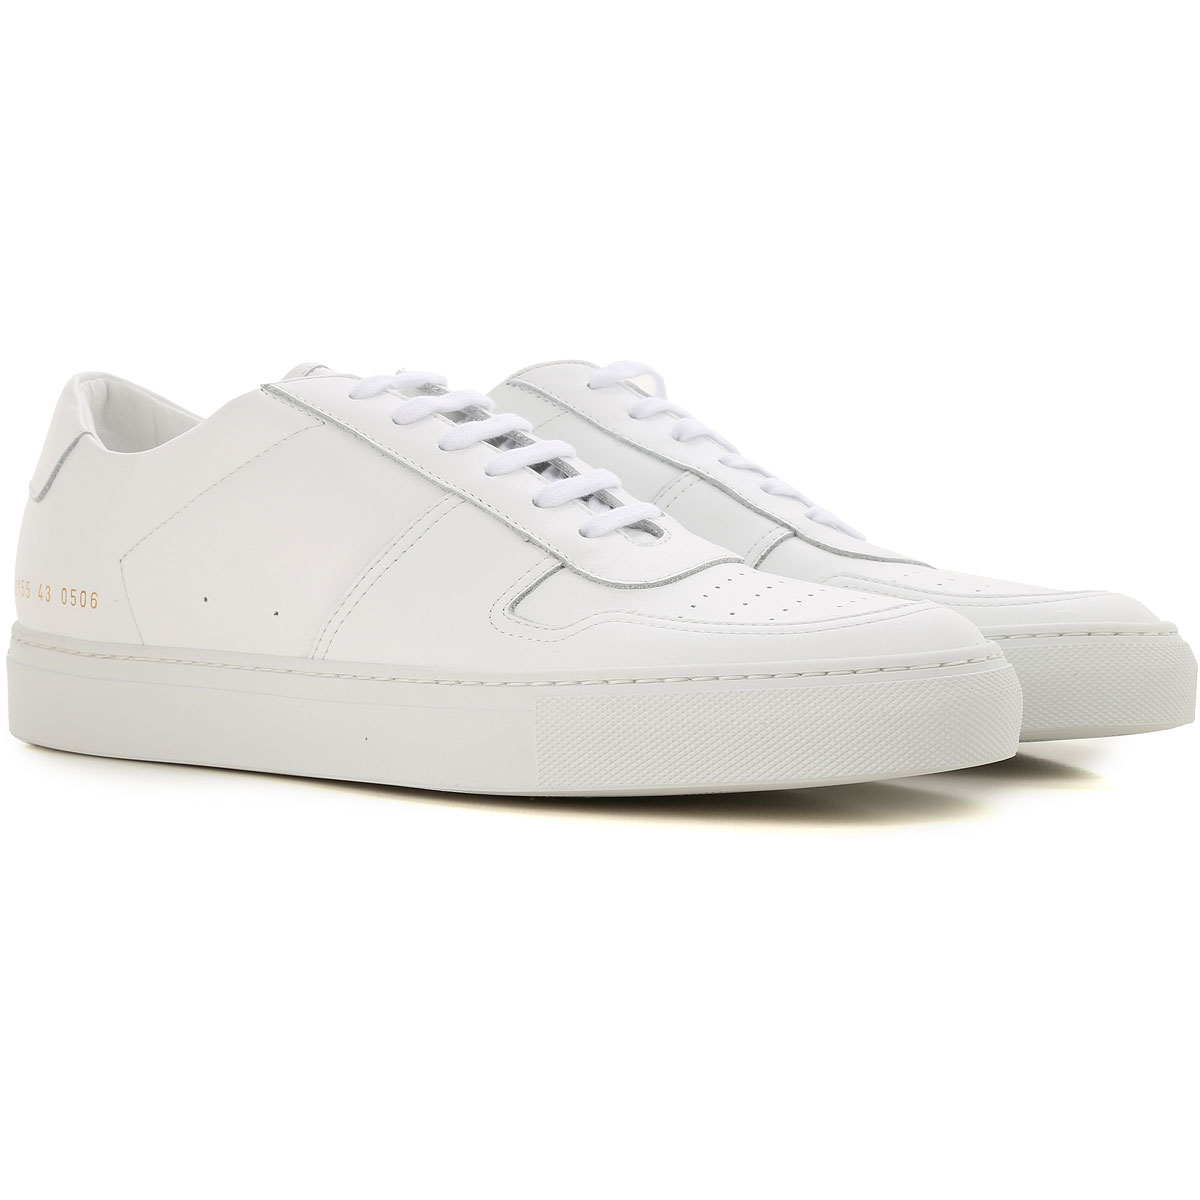 Mens Shoes Common Projects, Style code 